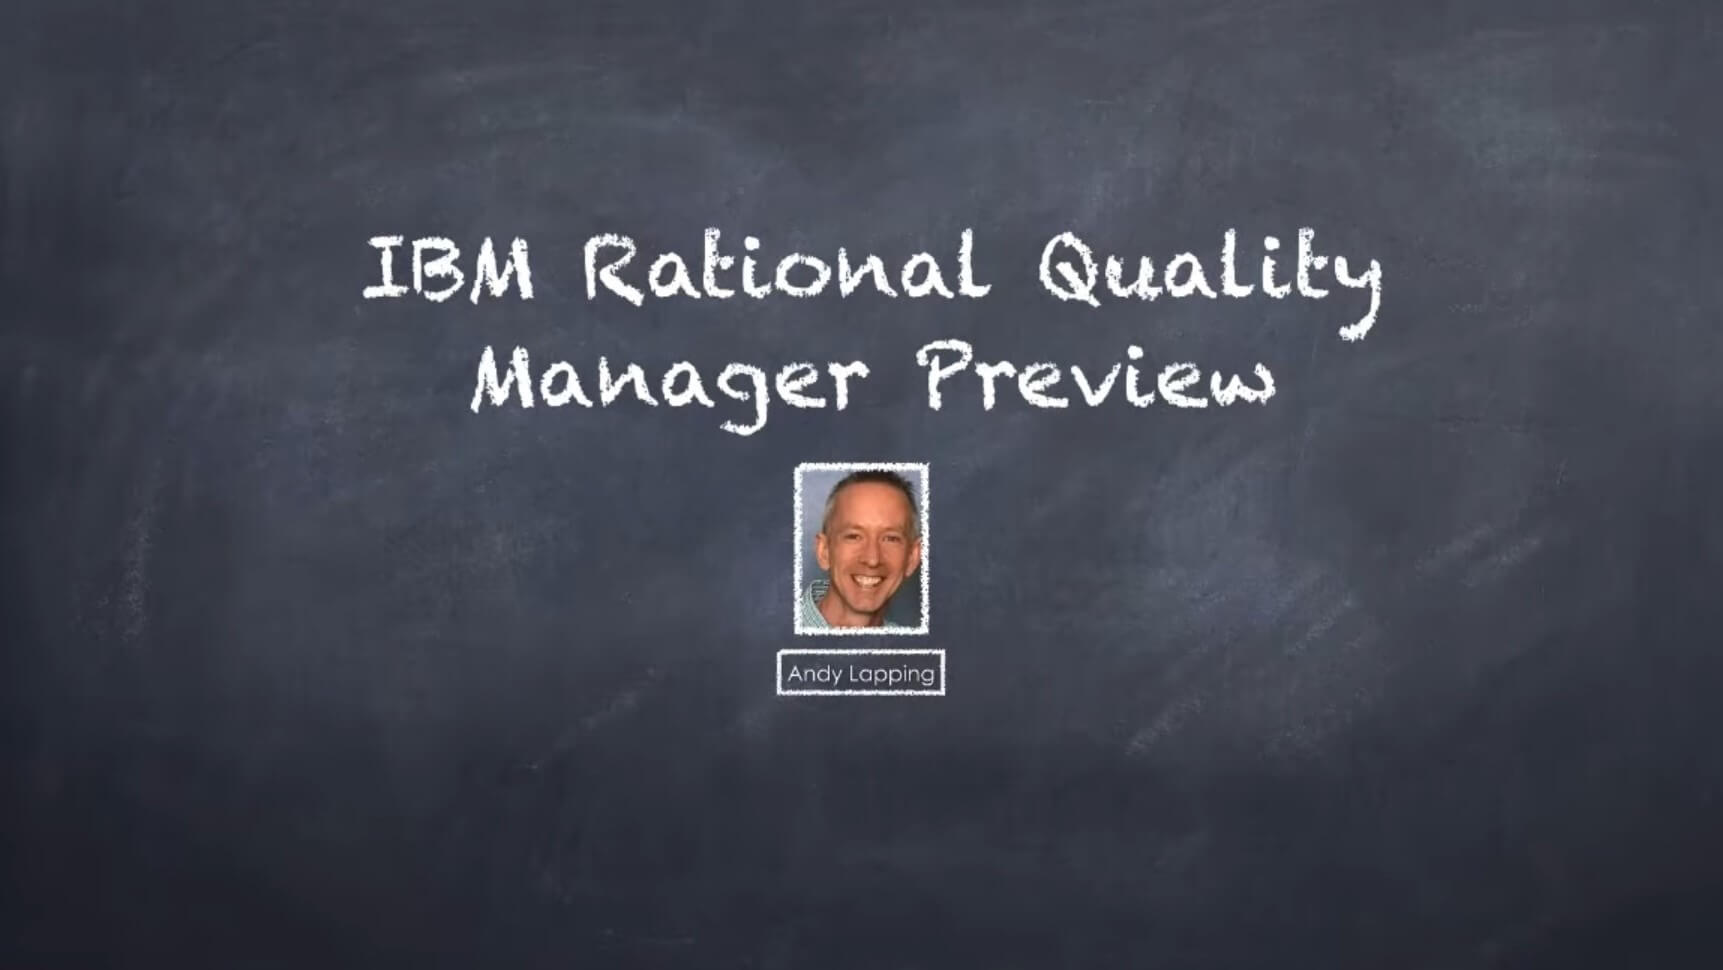 IBM Rational Quality Manager Preview